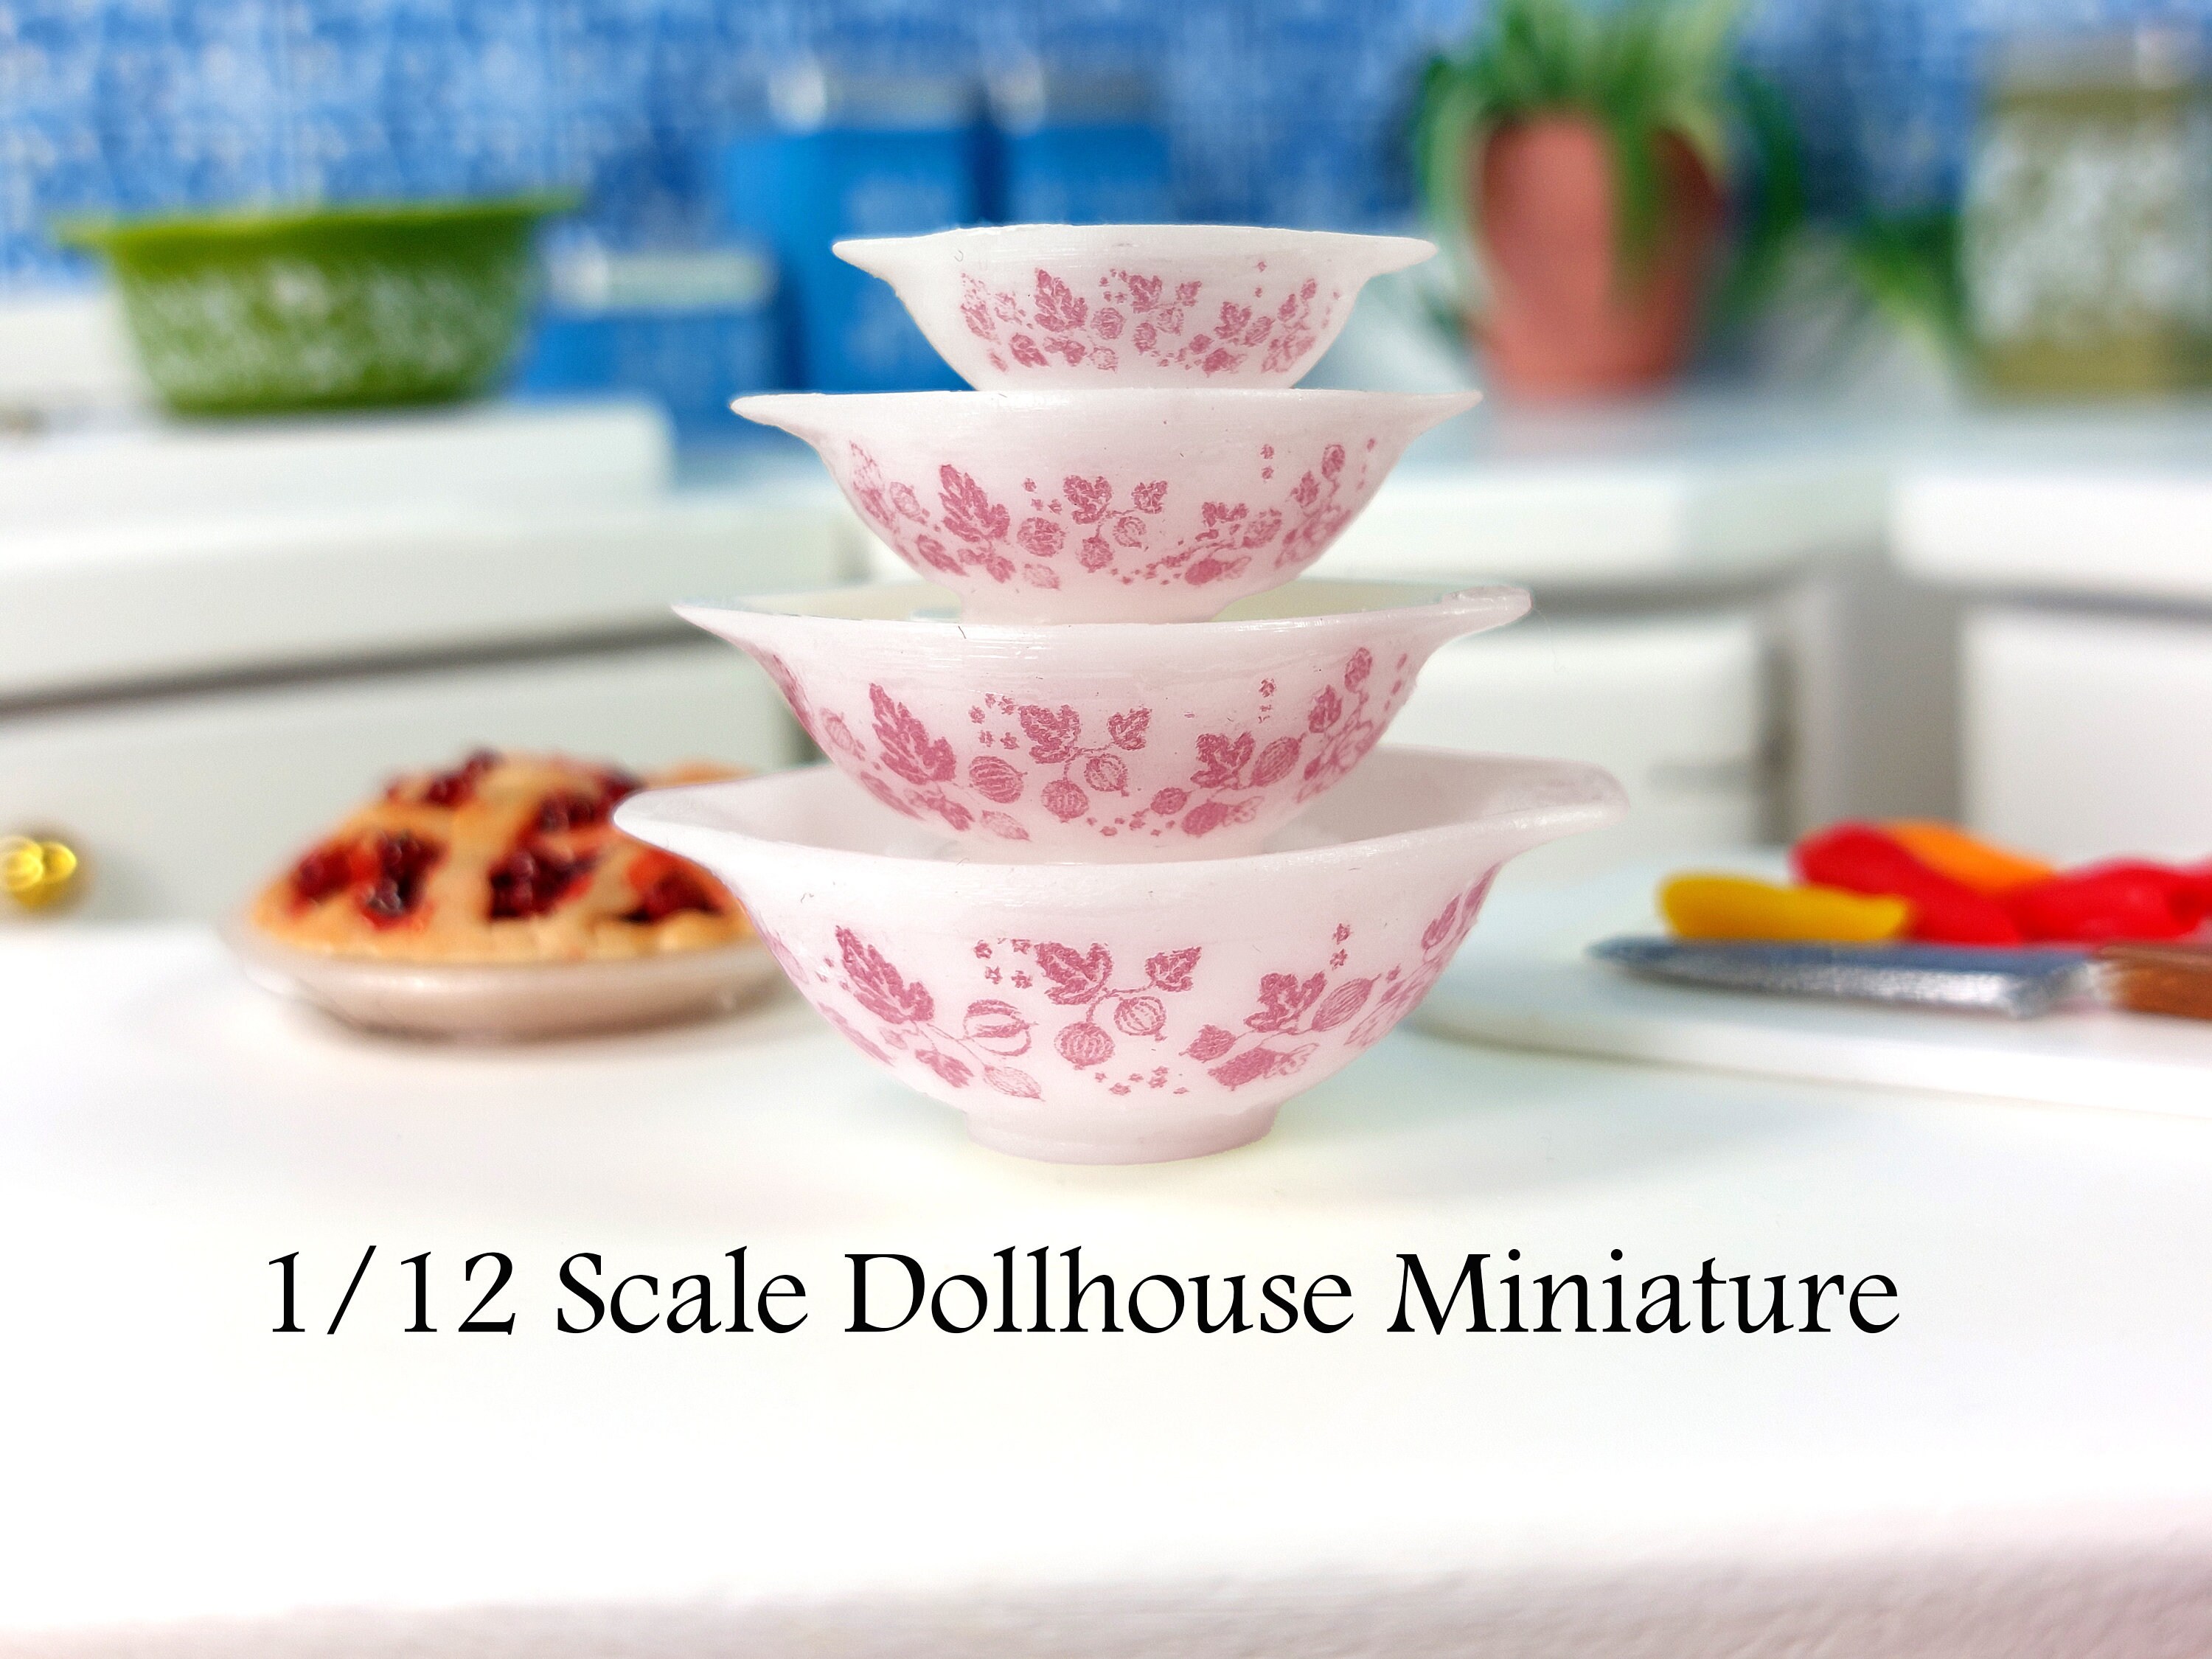 Pyrex Christmas Bakeware This is a 1:12 Scale Dollhouse Miniature 